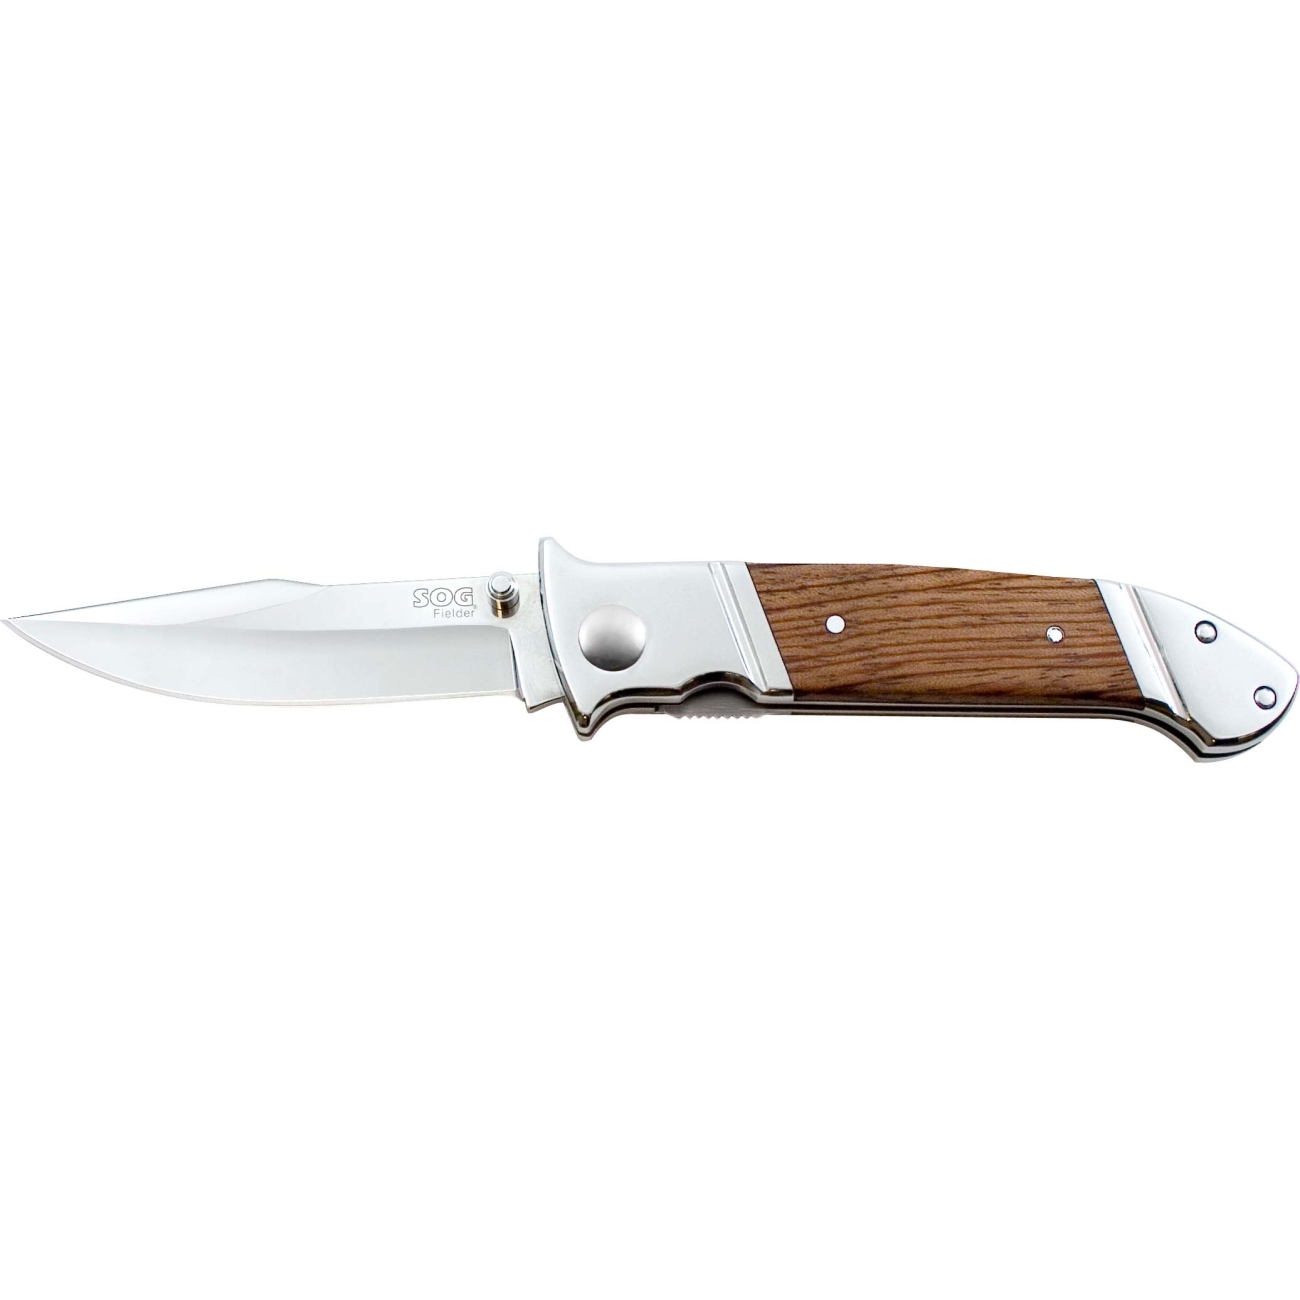 KNIFE, SOG, FIELDER, NON-ASSISTED